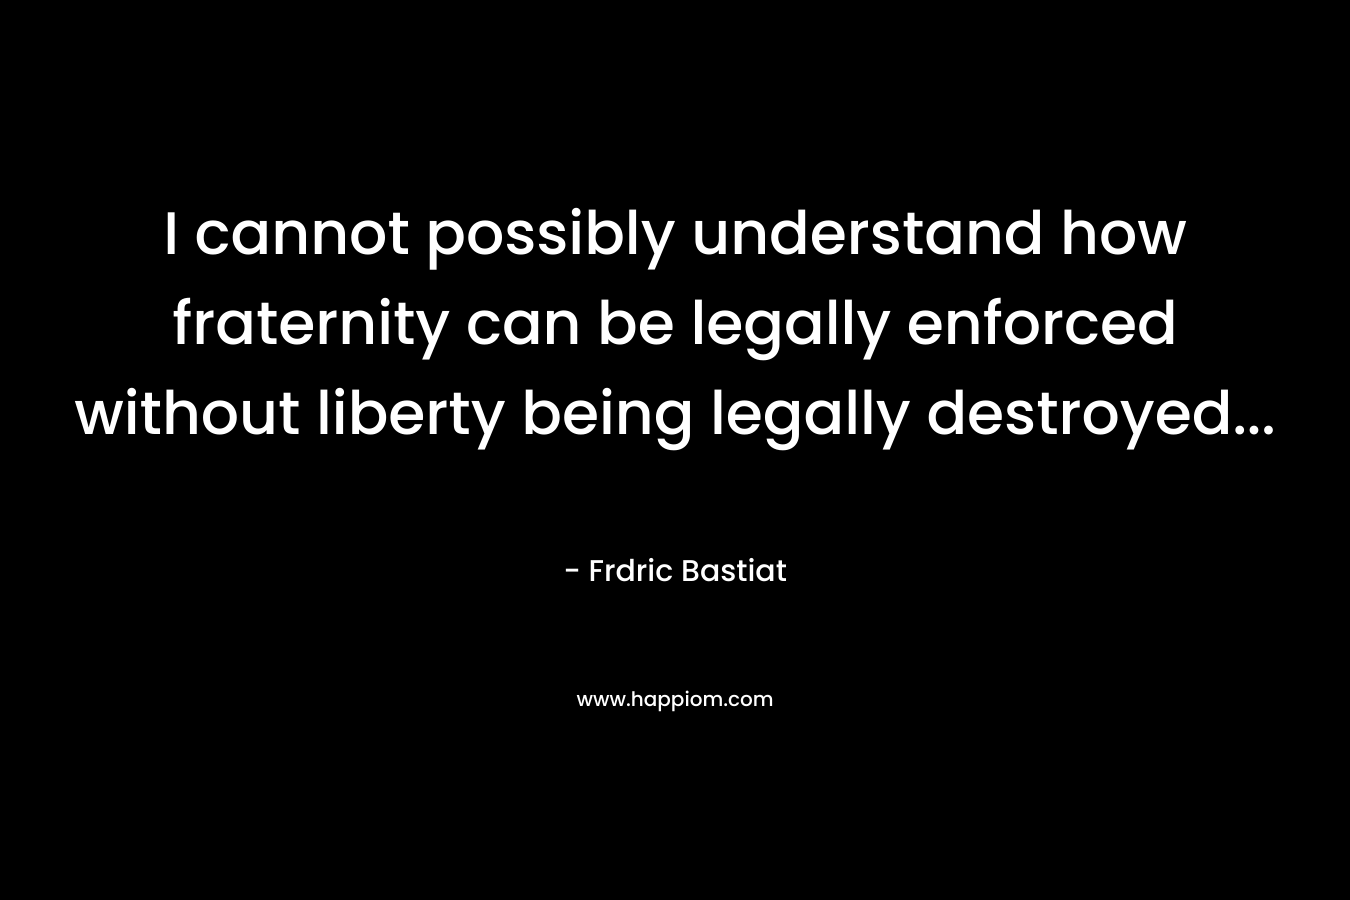 I cannot possibly understand how fraternity can be legally enforced without liberty being legally destroyed...